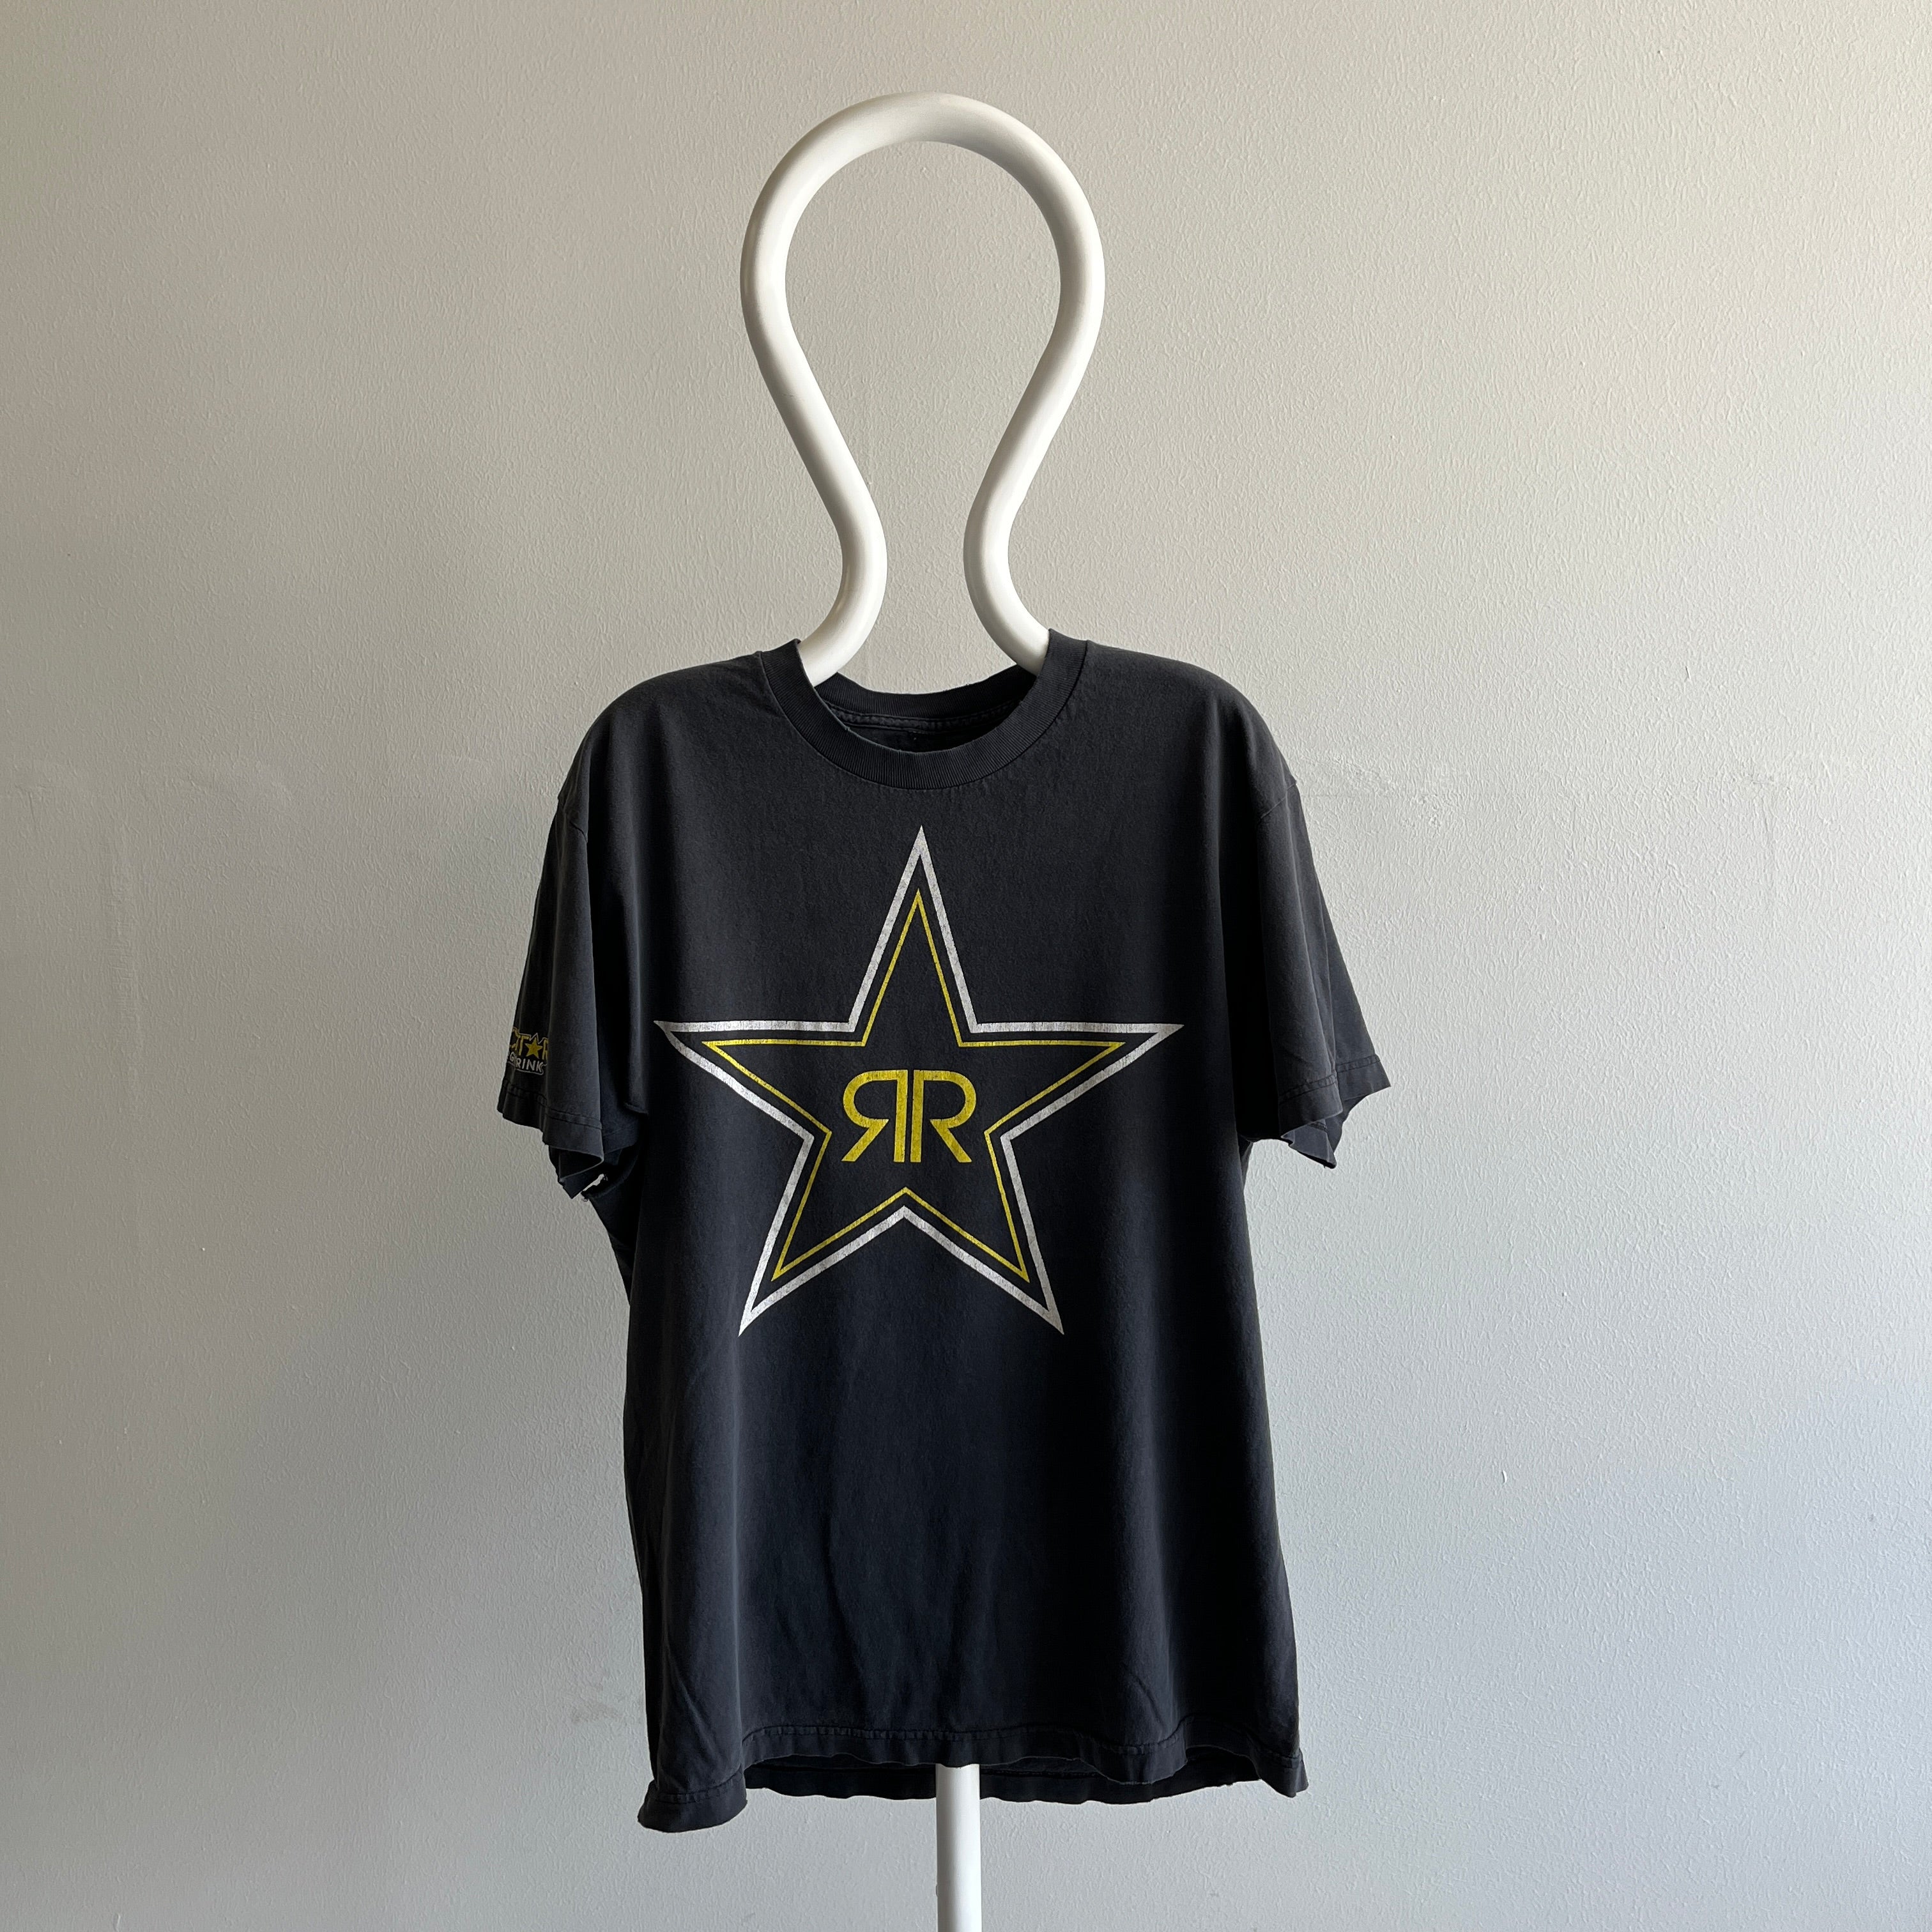 1990s Rock Star Energy Drink x Harley  BEAT UP T-Shirt - The Backside too!